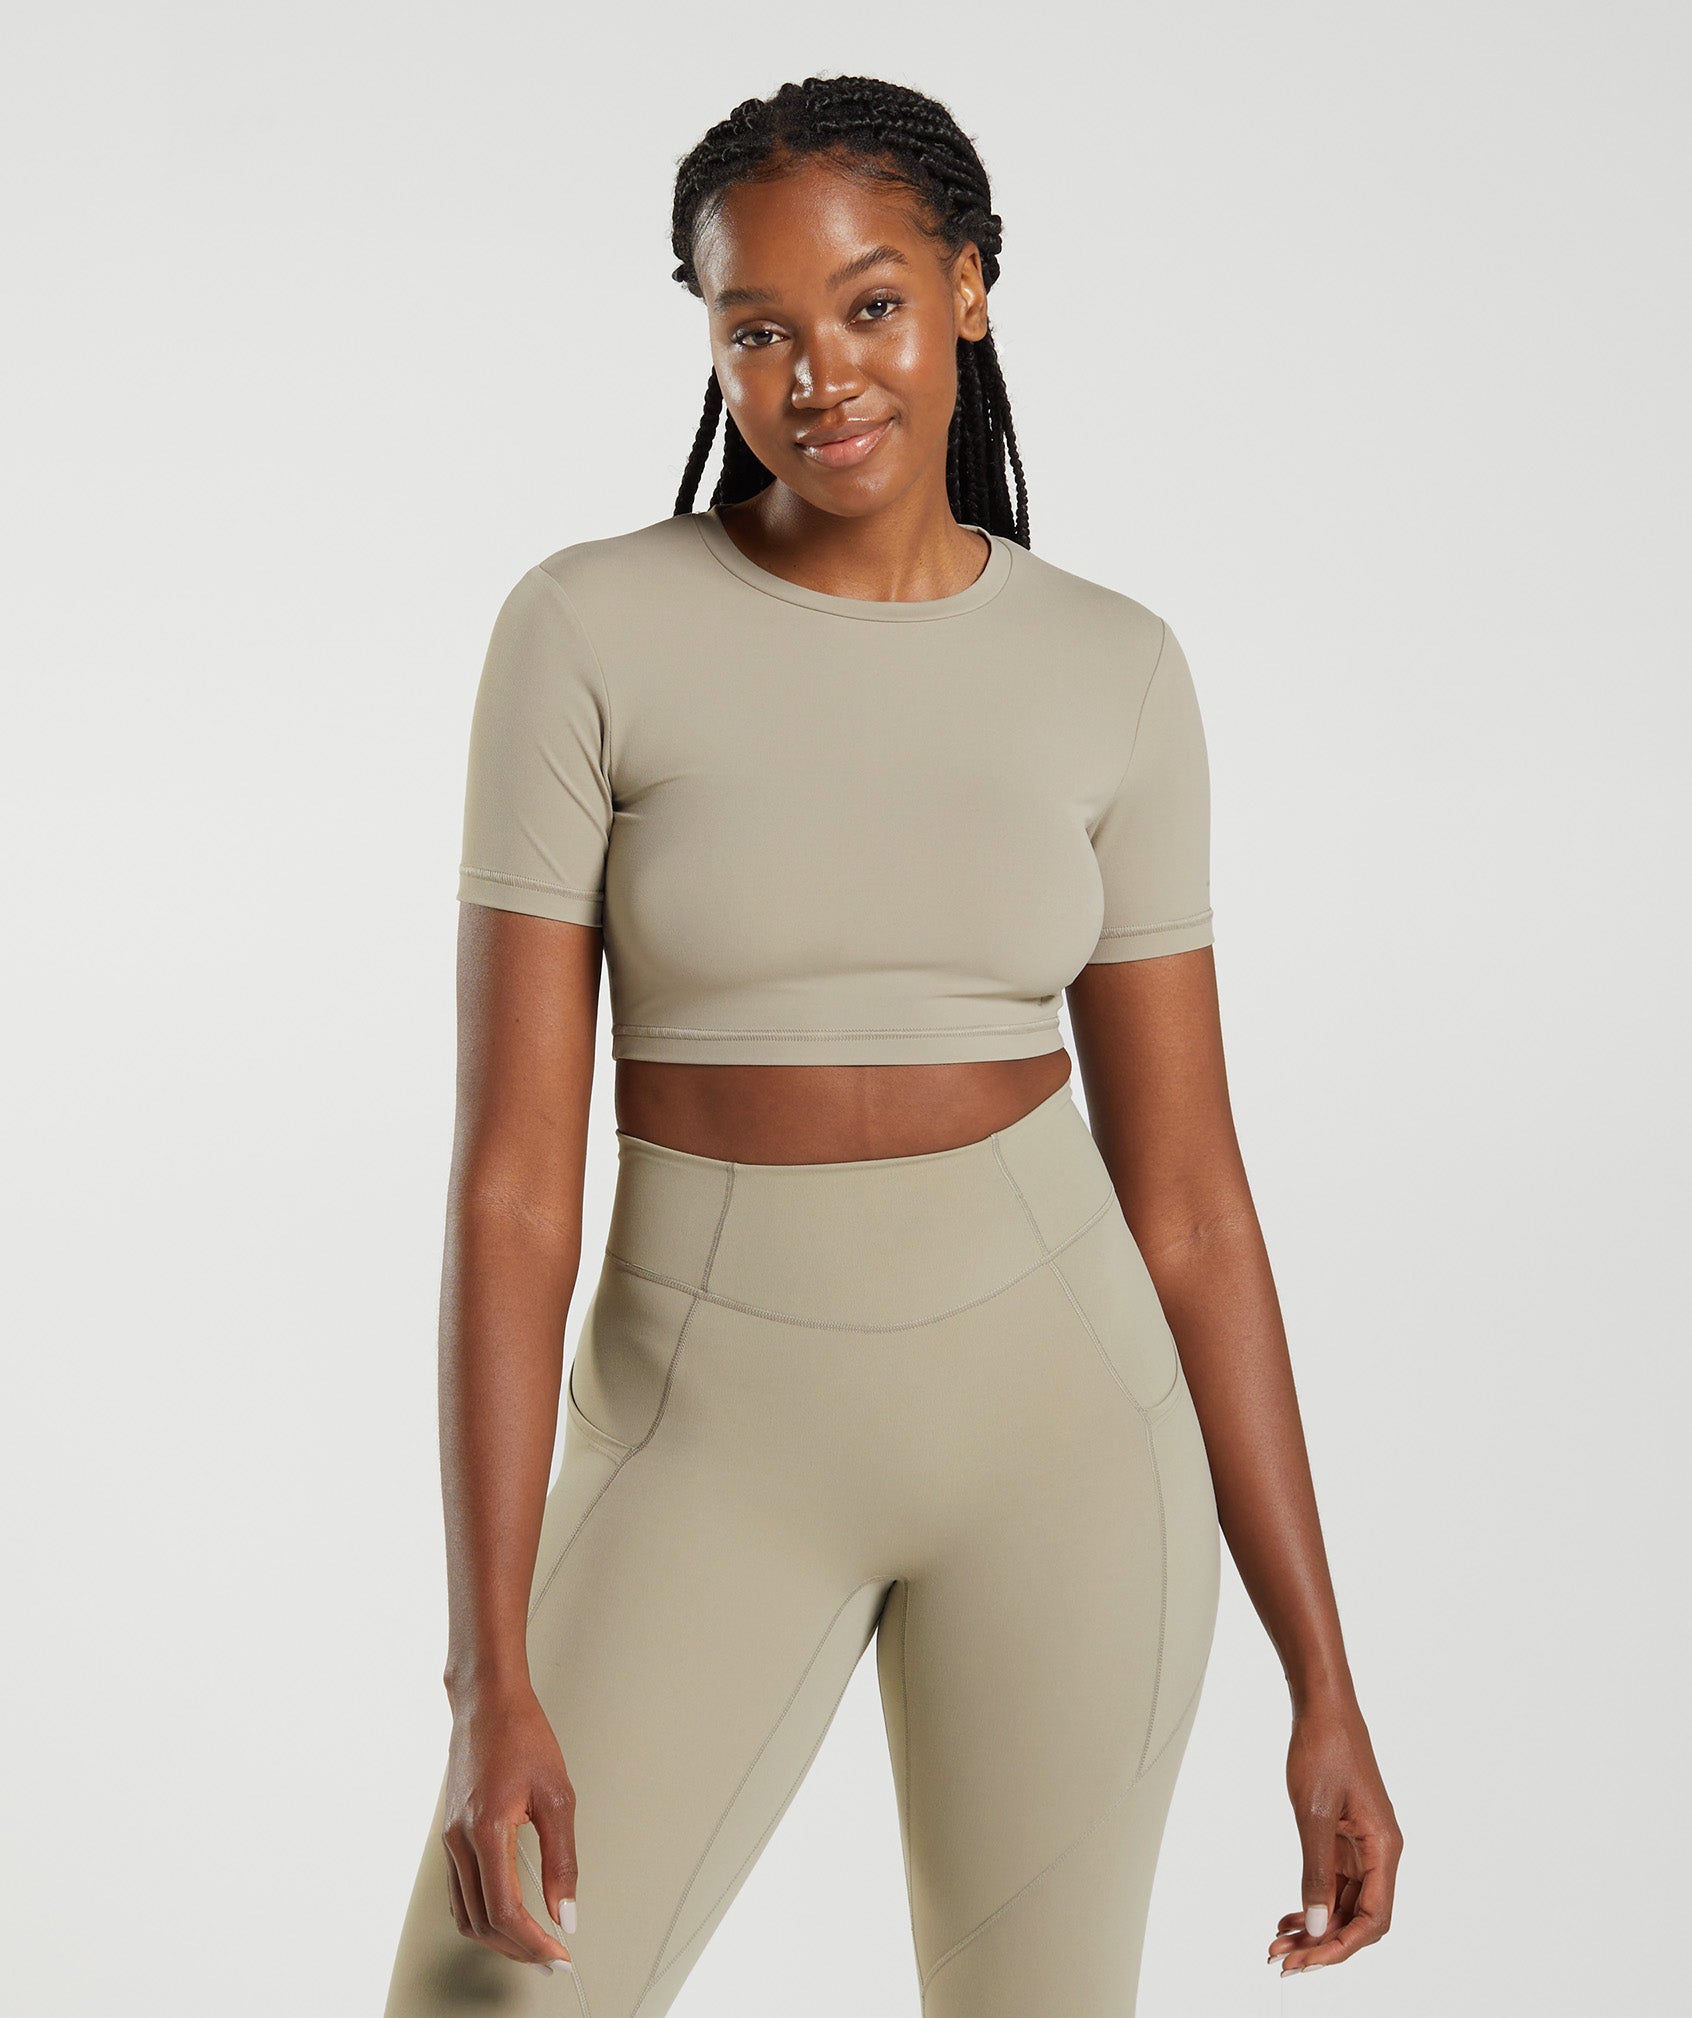 Whitney Short Sleeve Crop Top in Cement Brown - view 1